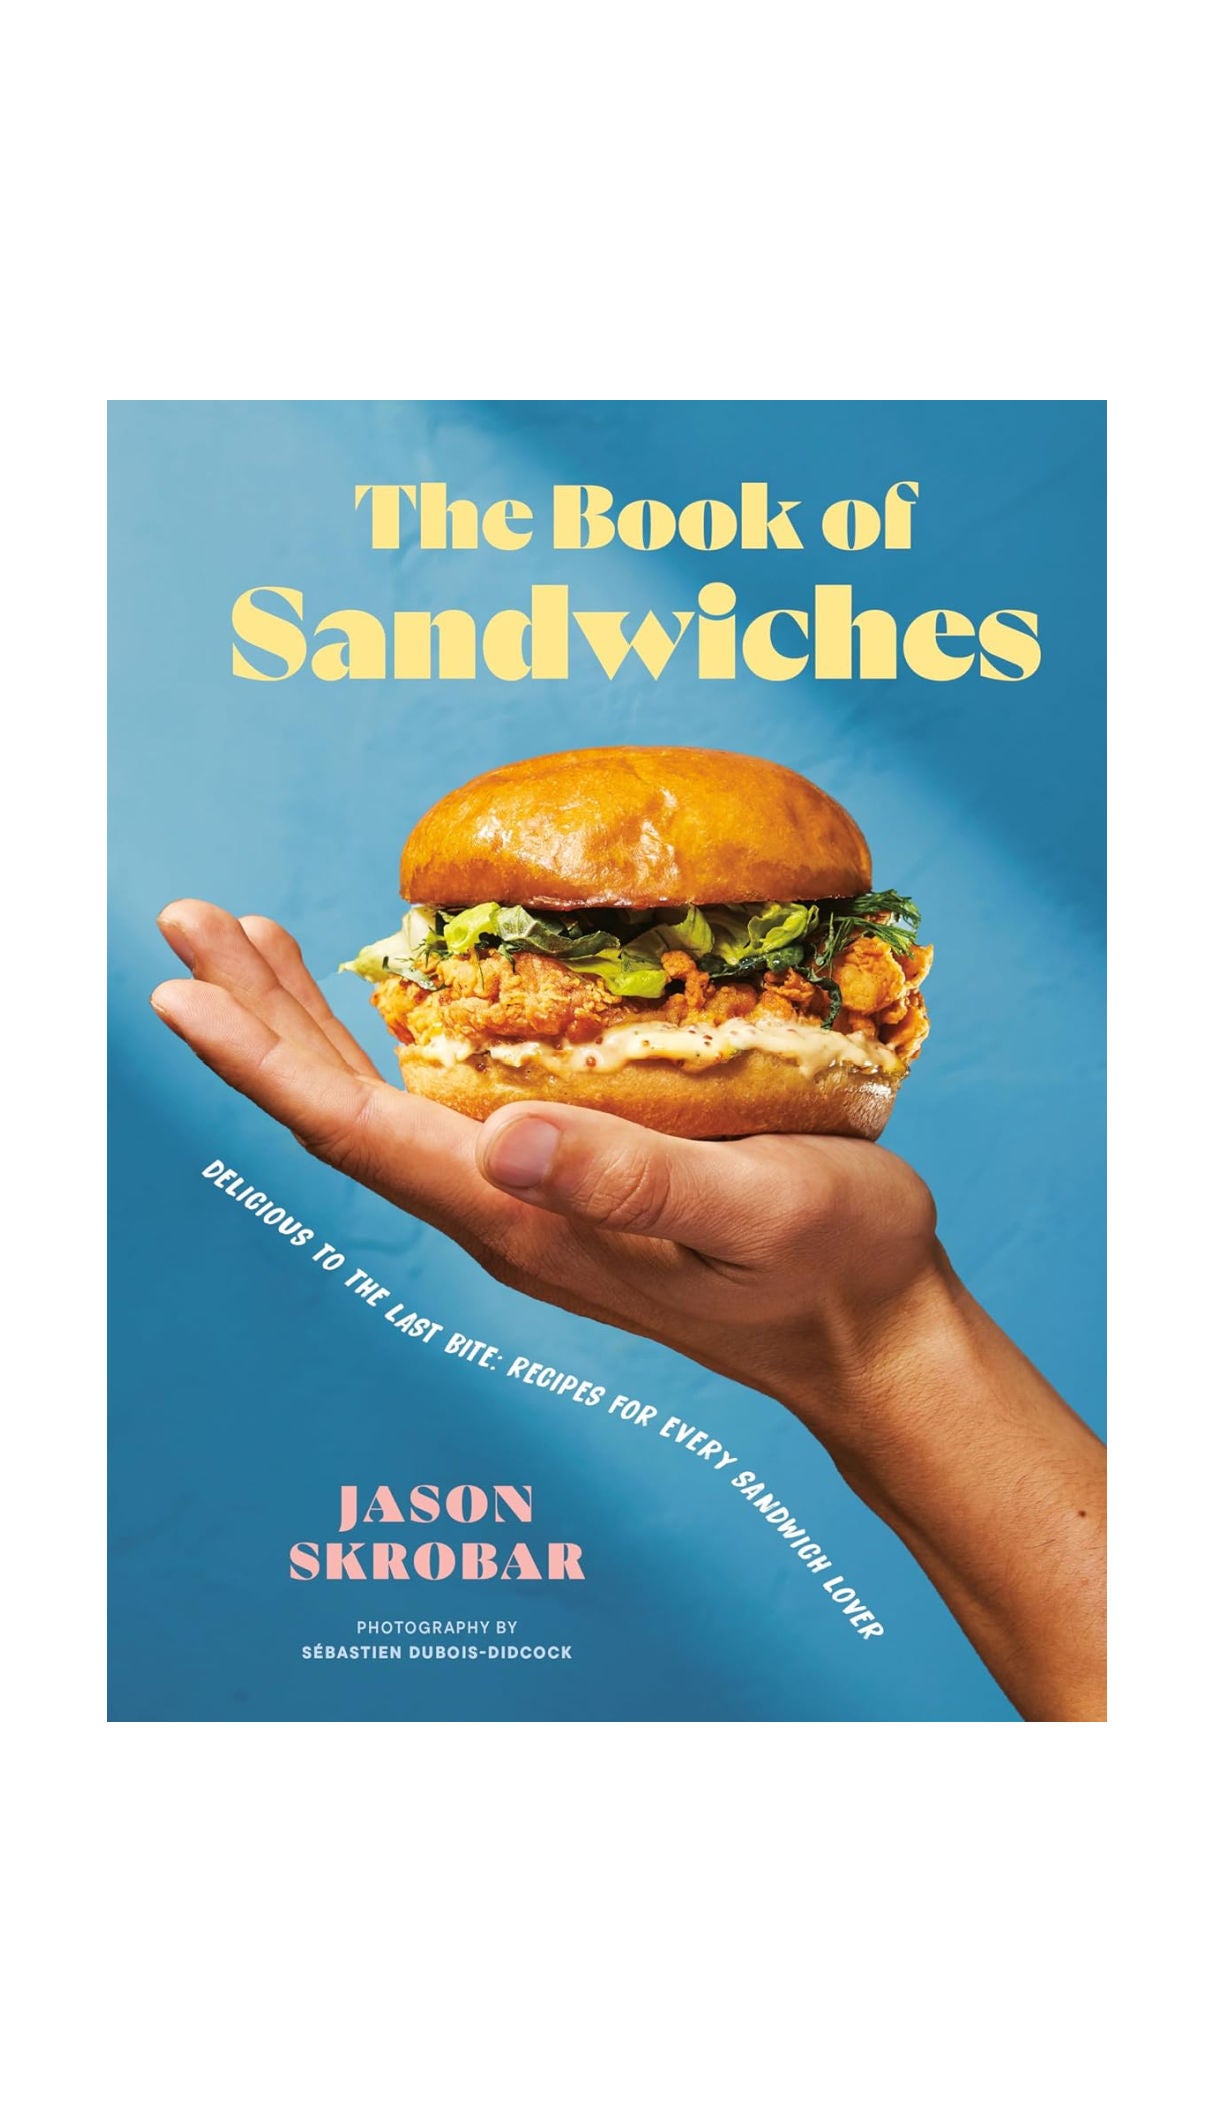 The Book of Sandwiches / COMING APRIL 30TH!